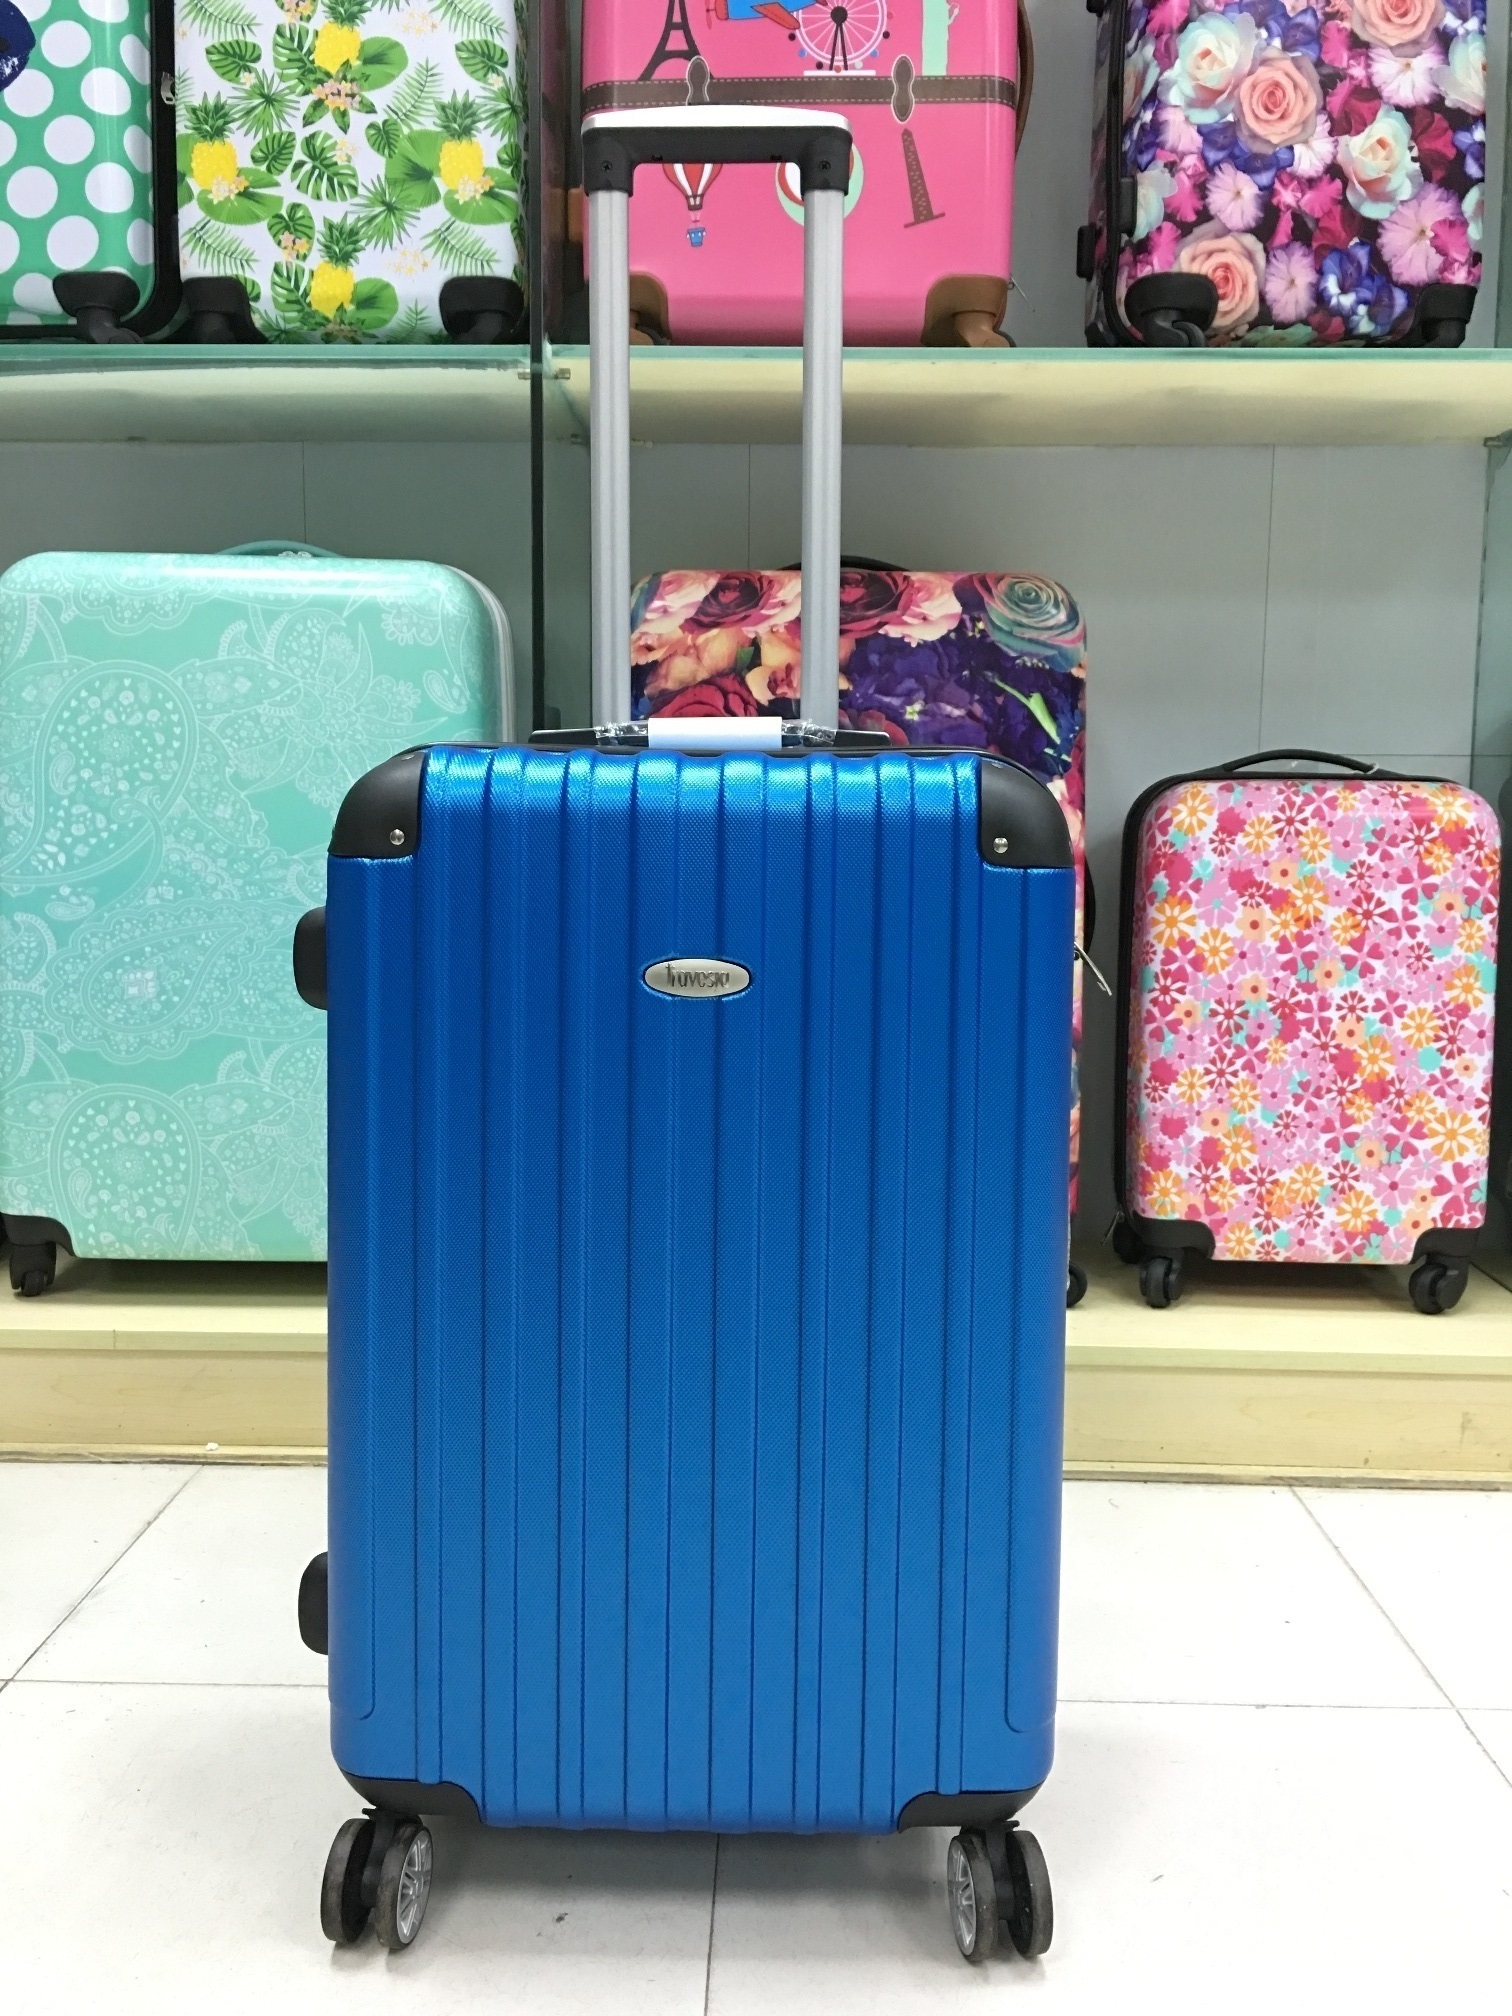 yanteng lucas luggage with anti-shock double-caster wheels